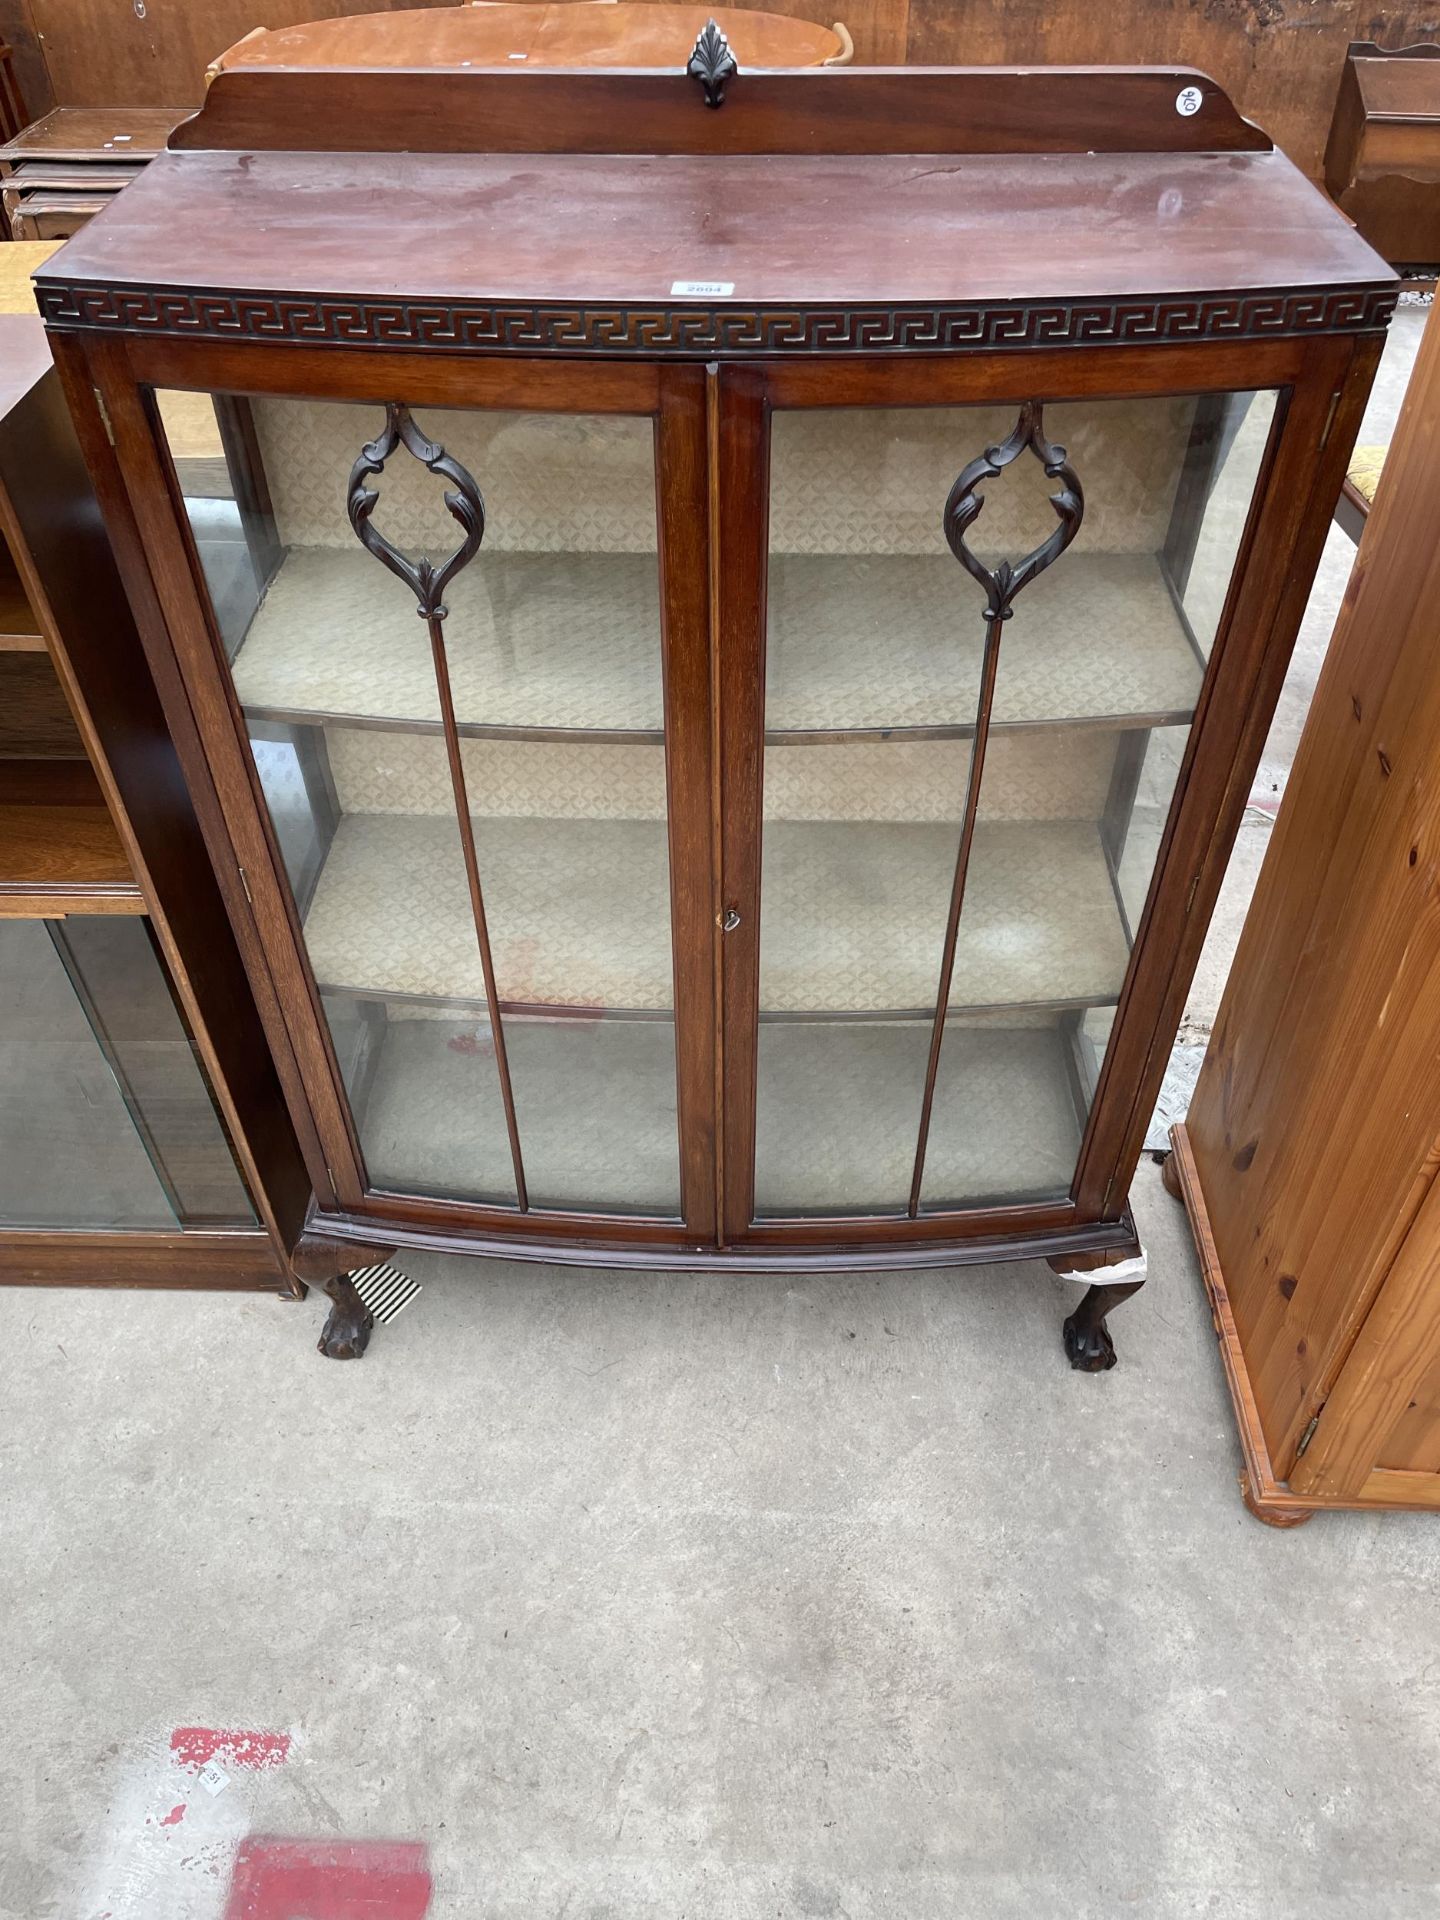 AN EARLY 20TH CENTURY MAHOGANY TWO DOOR GLASS DISPLAY CABINET WITH GREEK KEY CARVING, ON CABRIOLE